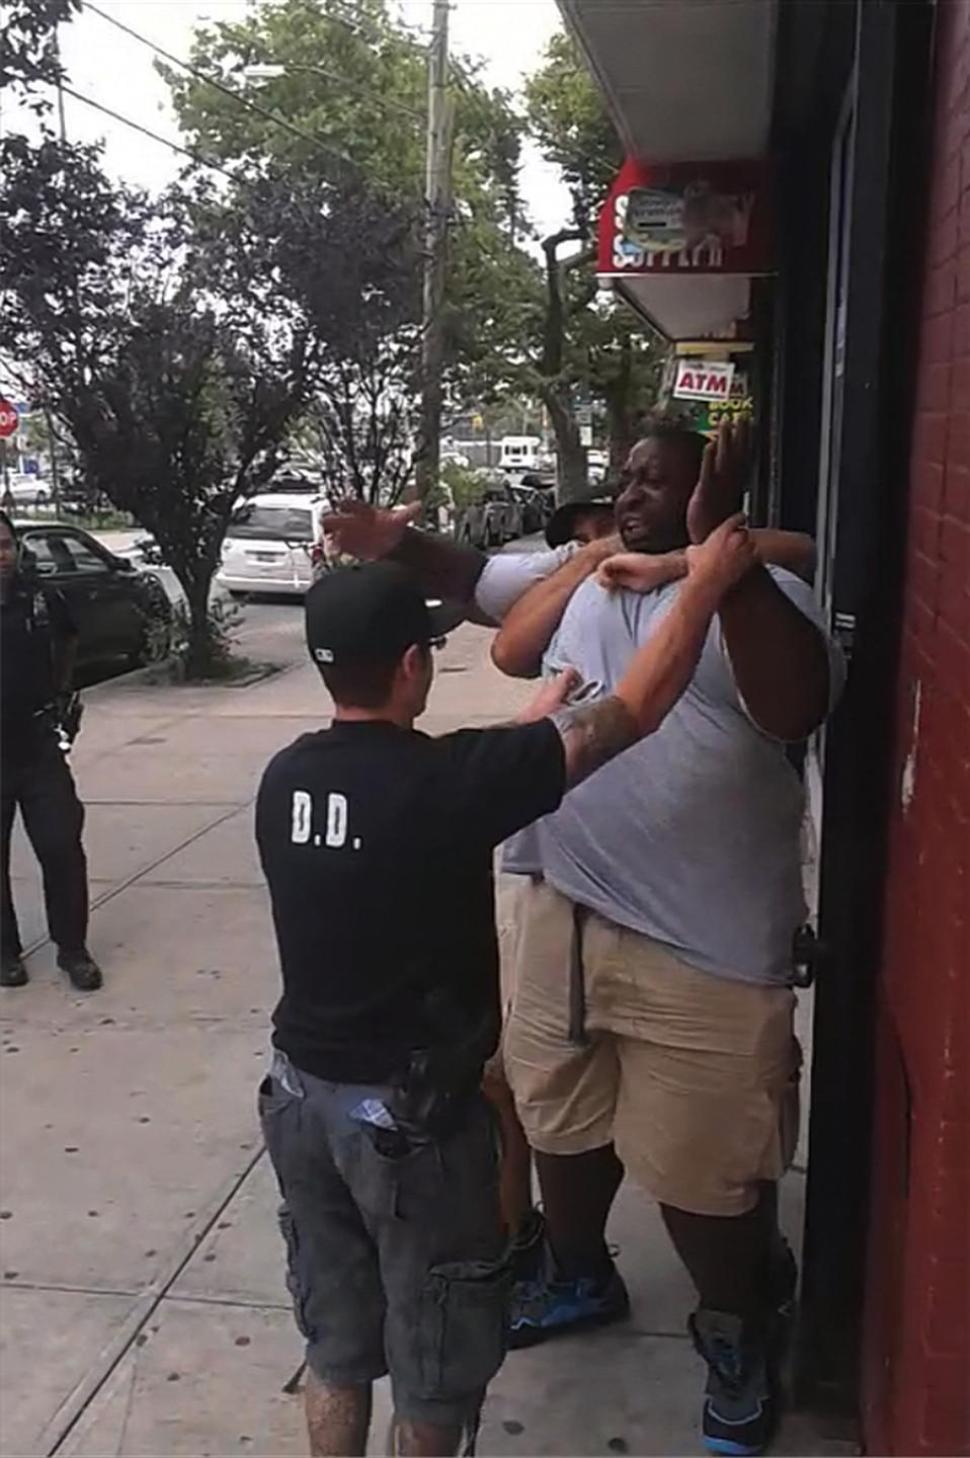 Video recorded on a cellphone caught the final moments of Eric Garner, who died from a chokehold as NYPD cops tried arresting him. It sparked outrage and protests.